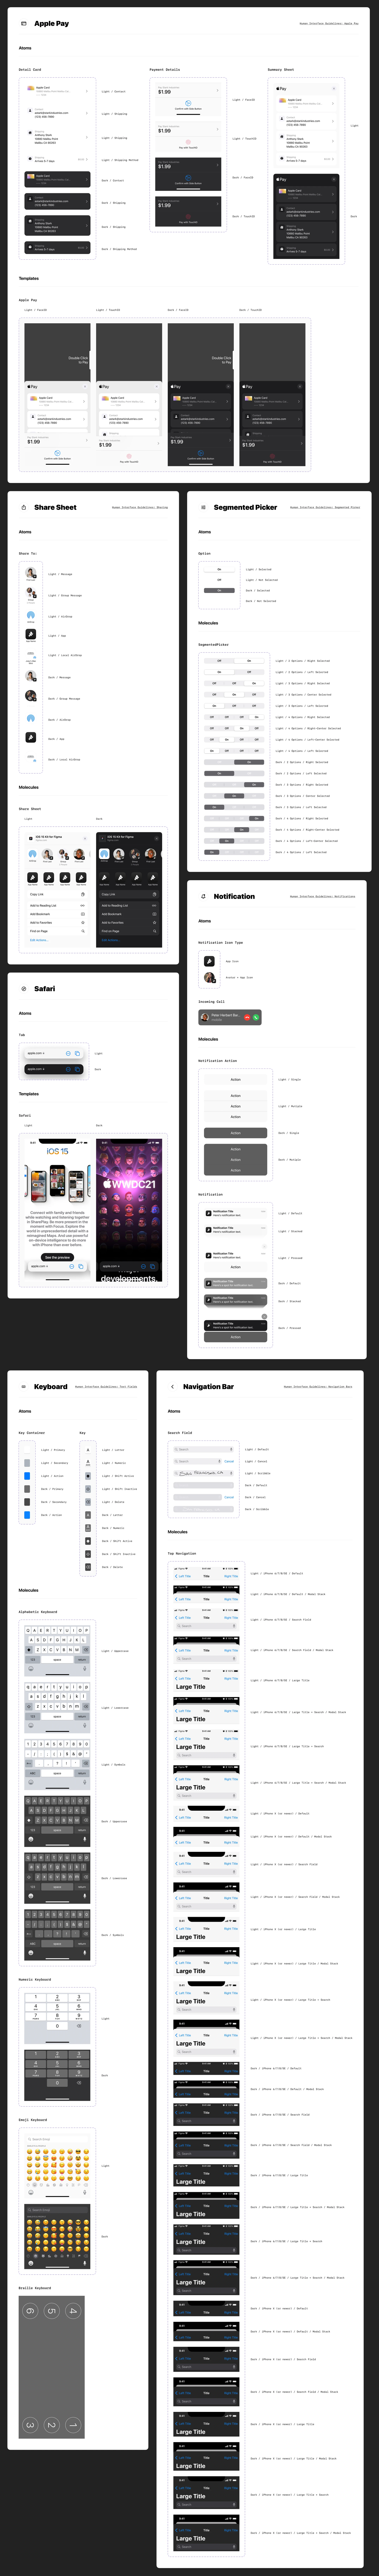 iOS 15 Free UI Kit for Figma - This free UI Kit includes dozens of new and refactored components, text styles, color styles, hundreds of variants, light/dark mode, & more.